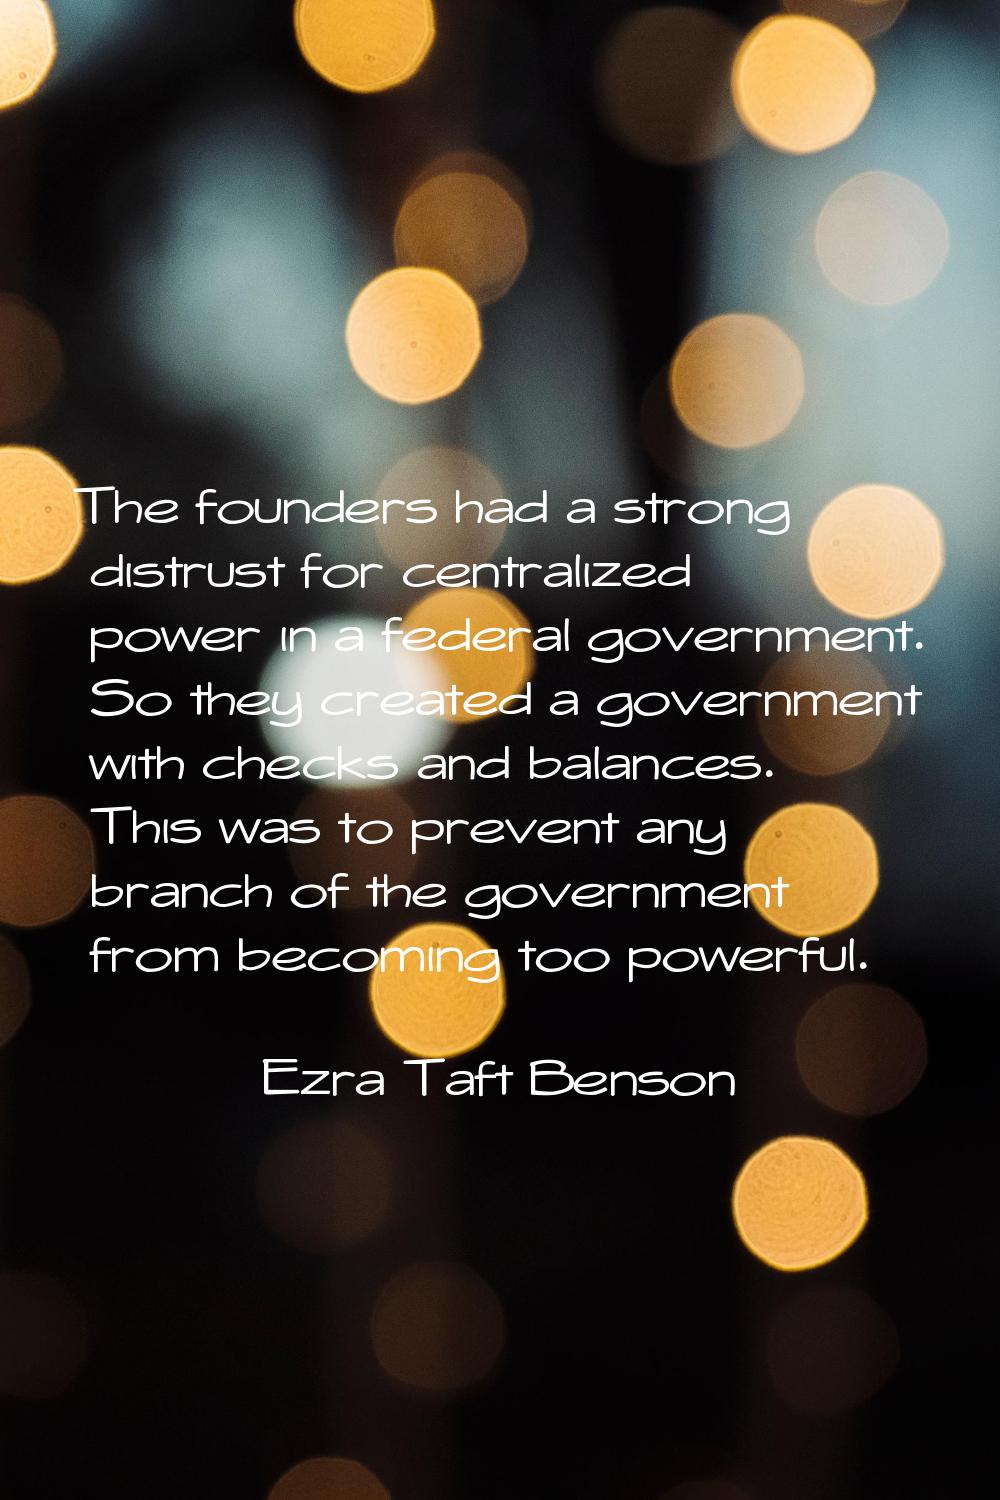 The founders had a strong distrust for centralized power in a federal government. So they created a